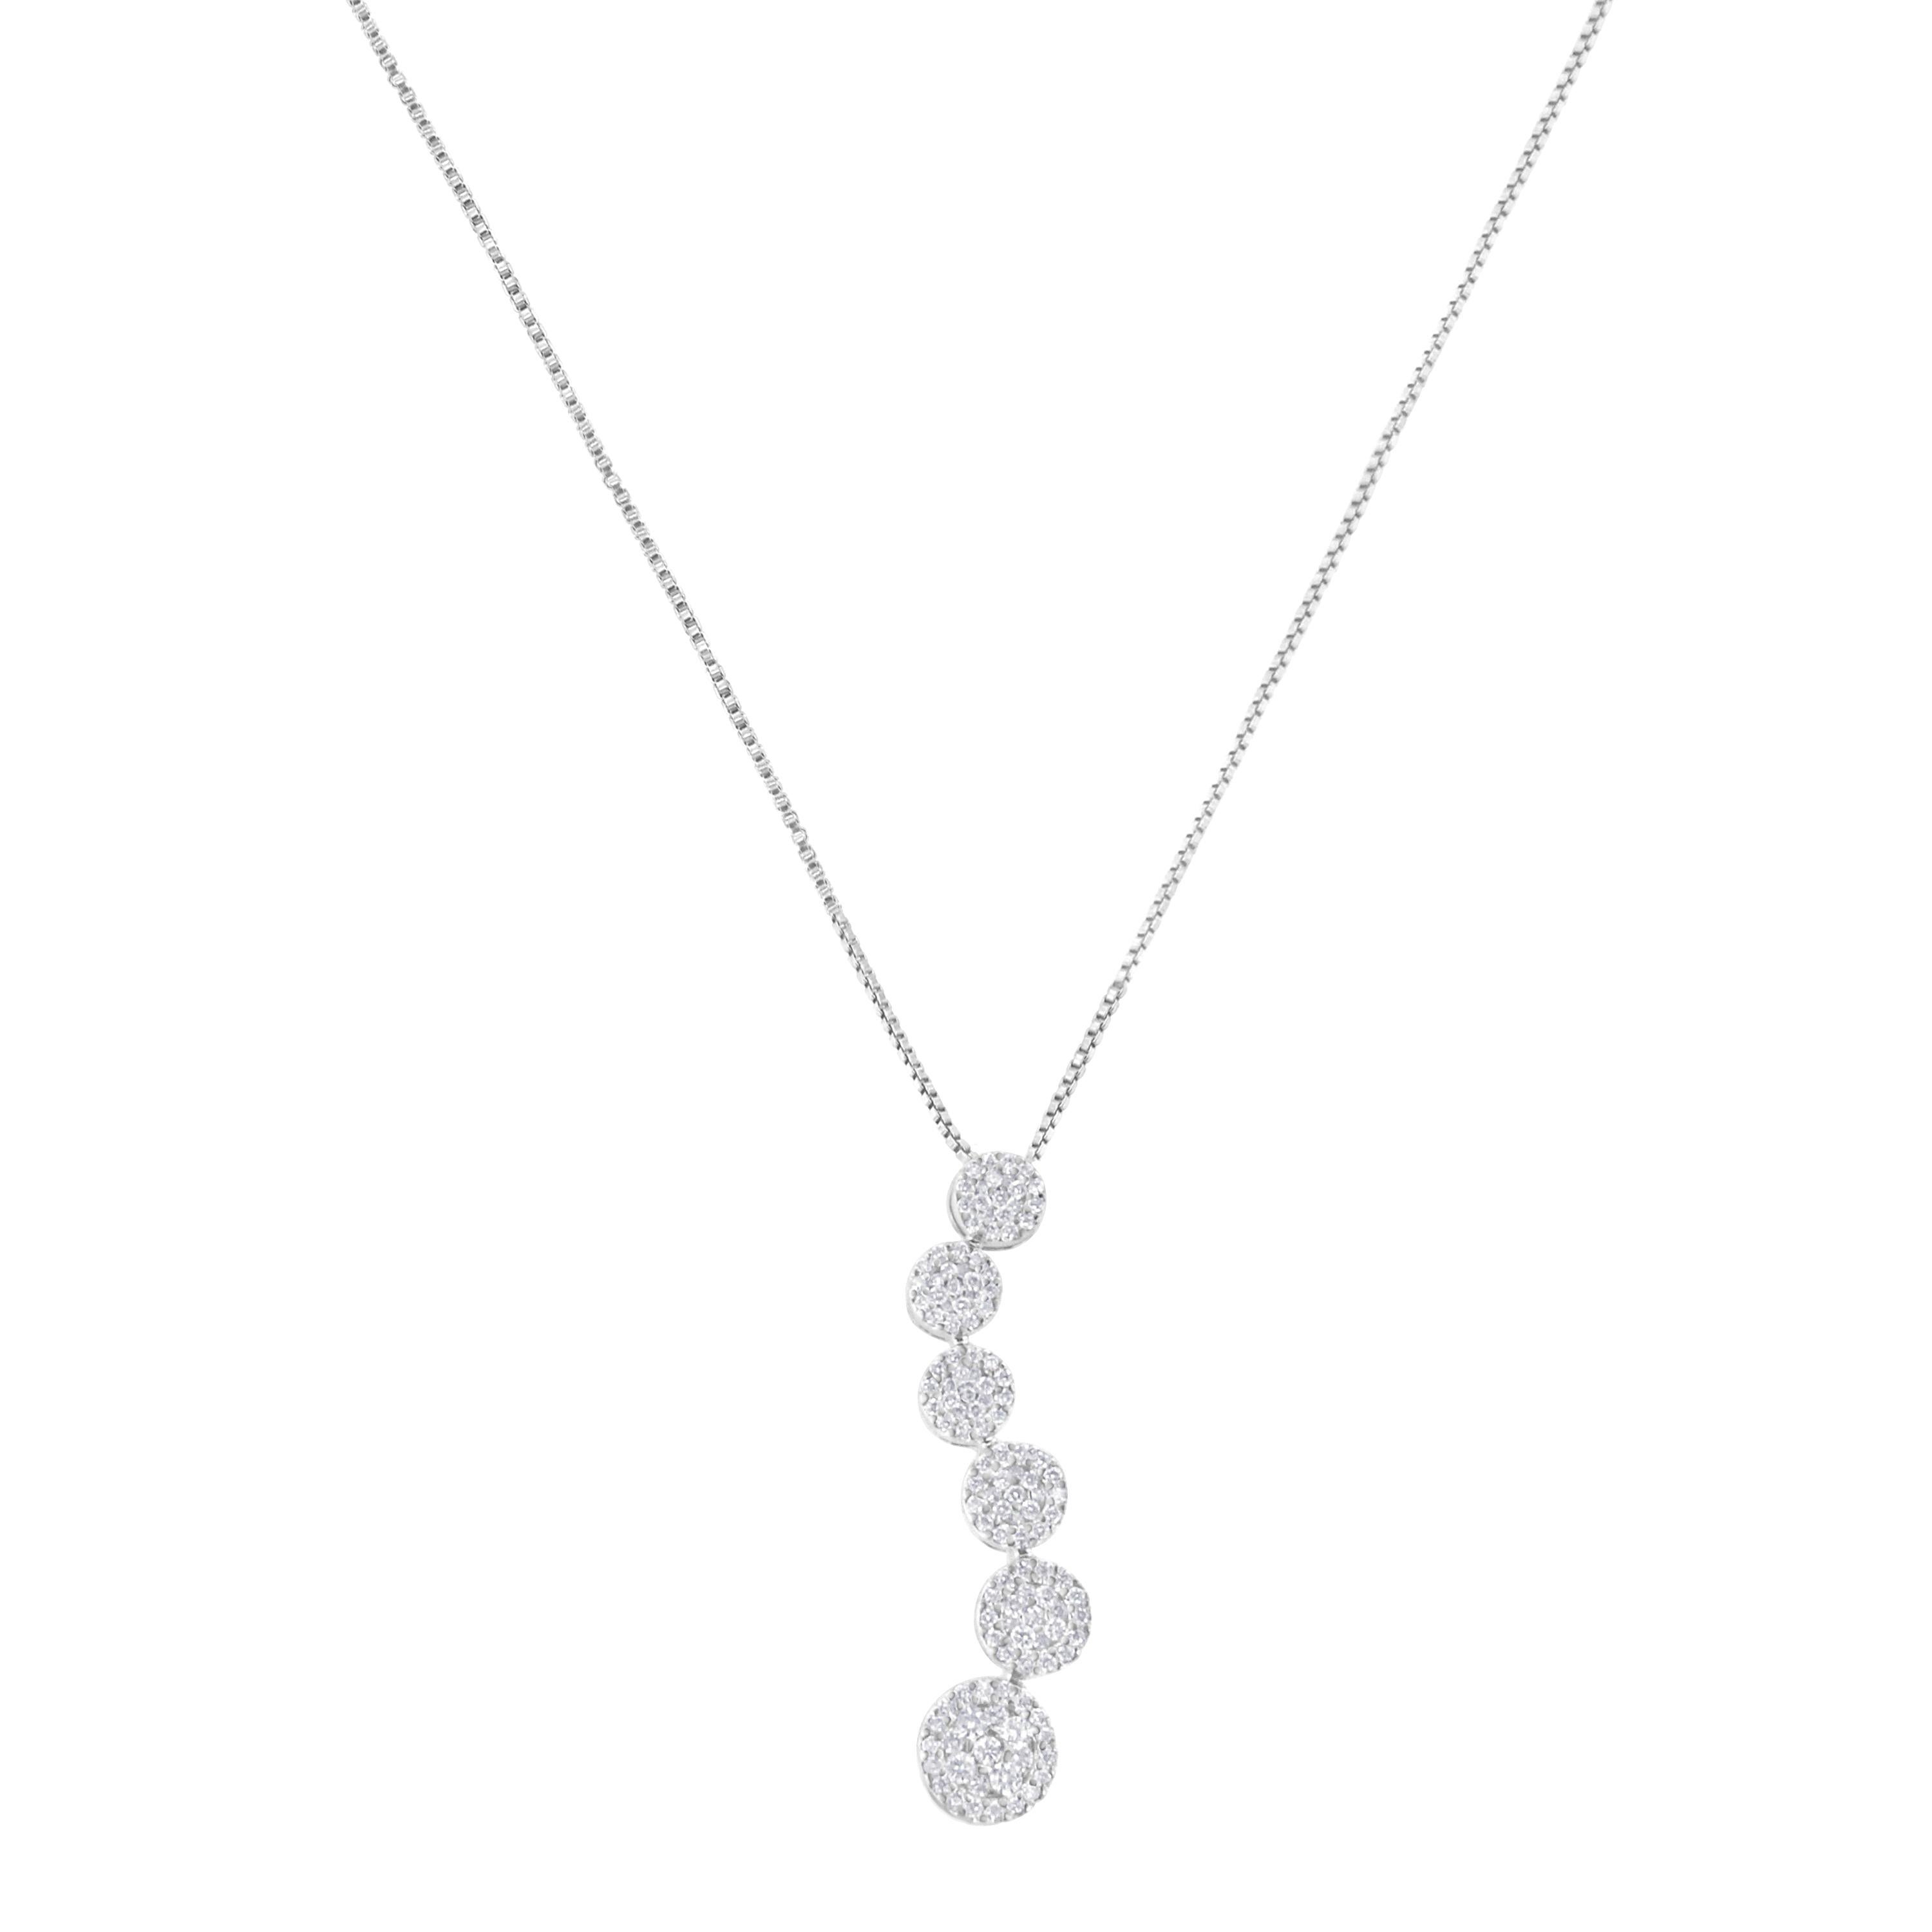 Celebrate life's journeys with this timeless 14k white gold diamond journey pendant. This alluring design features a soft 